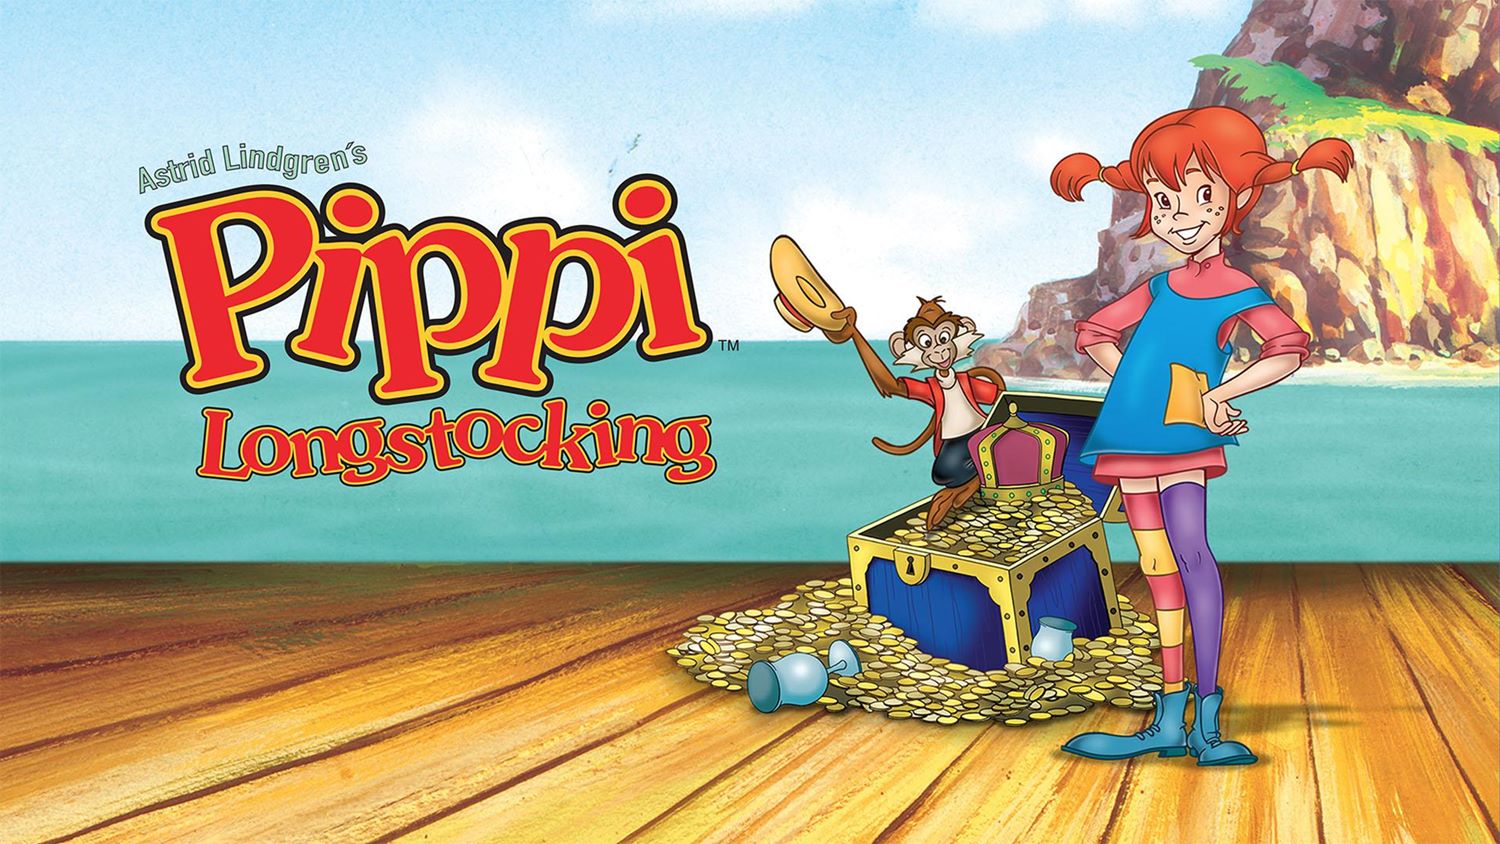 How To Watch Pippi Longstocking